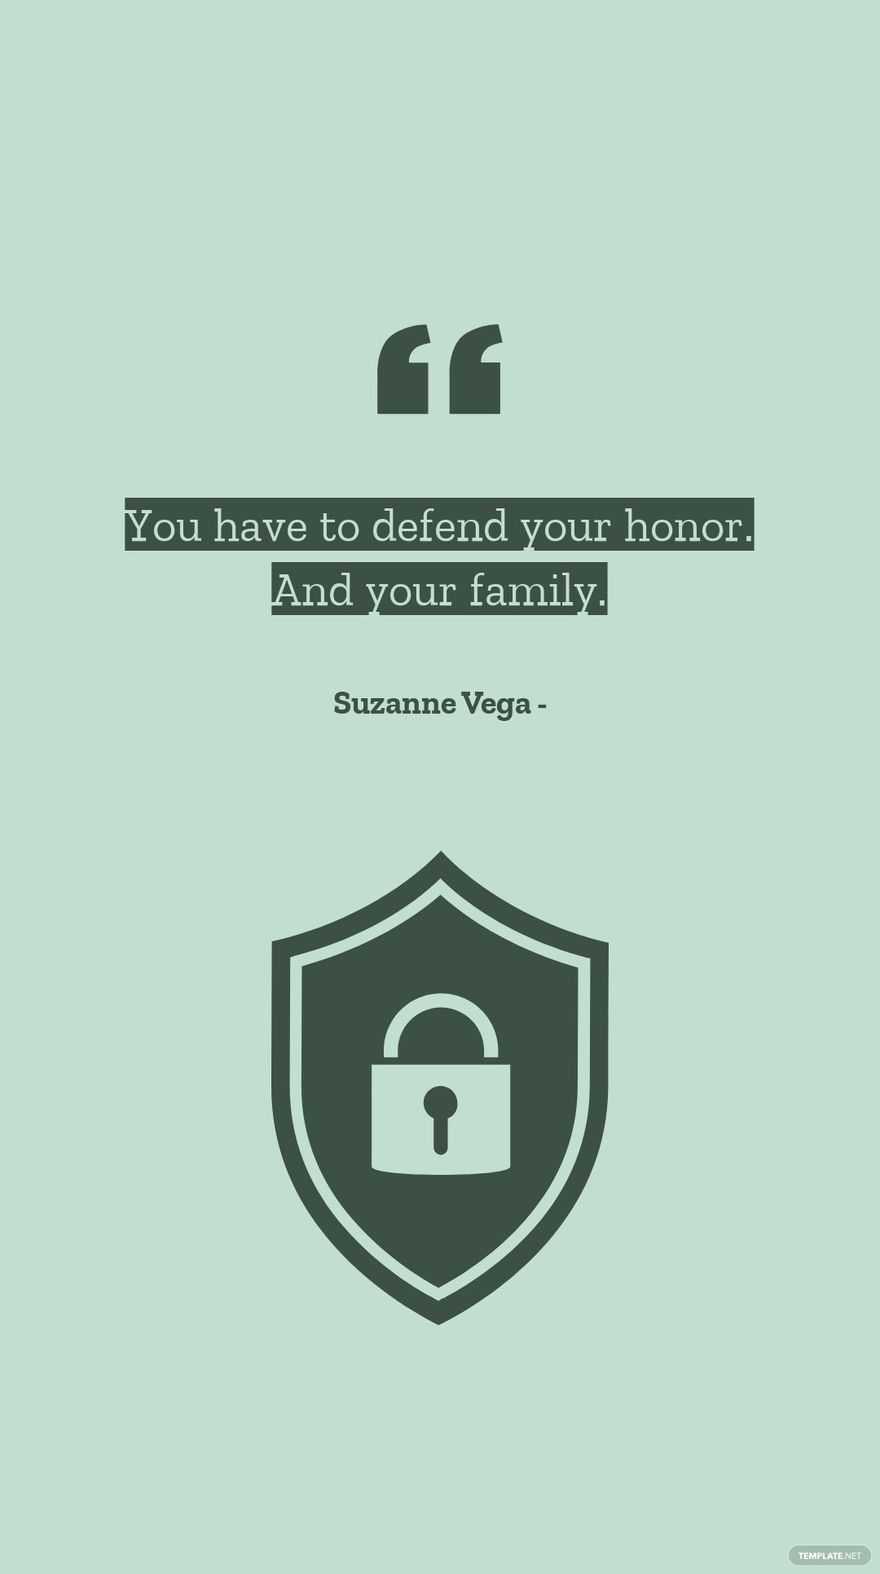 Free Suzanne Vega - You have to defend your honor. And your family.